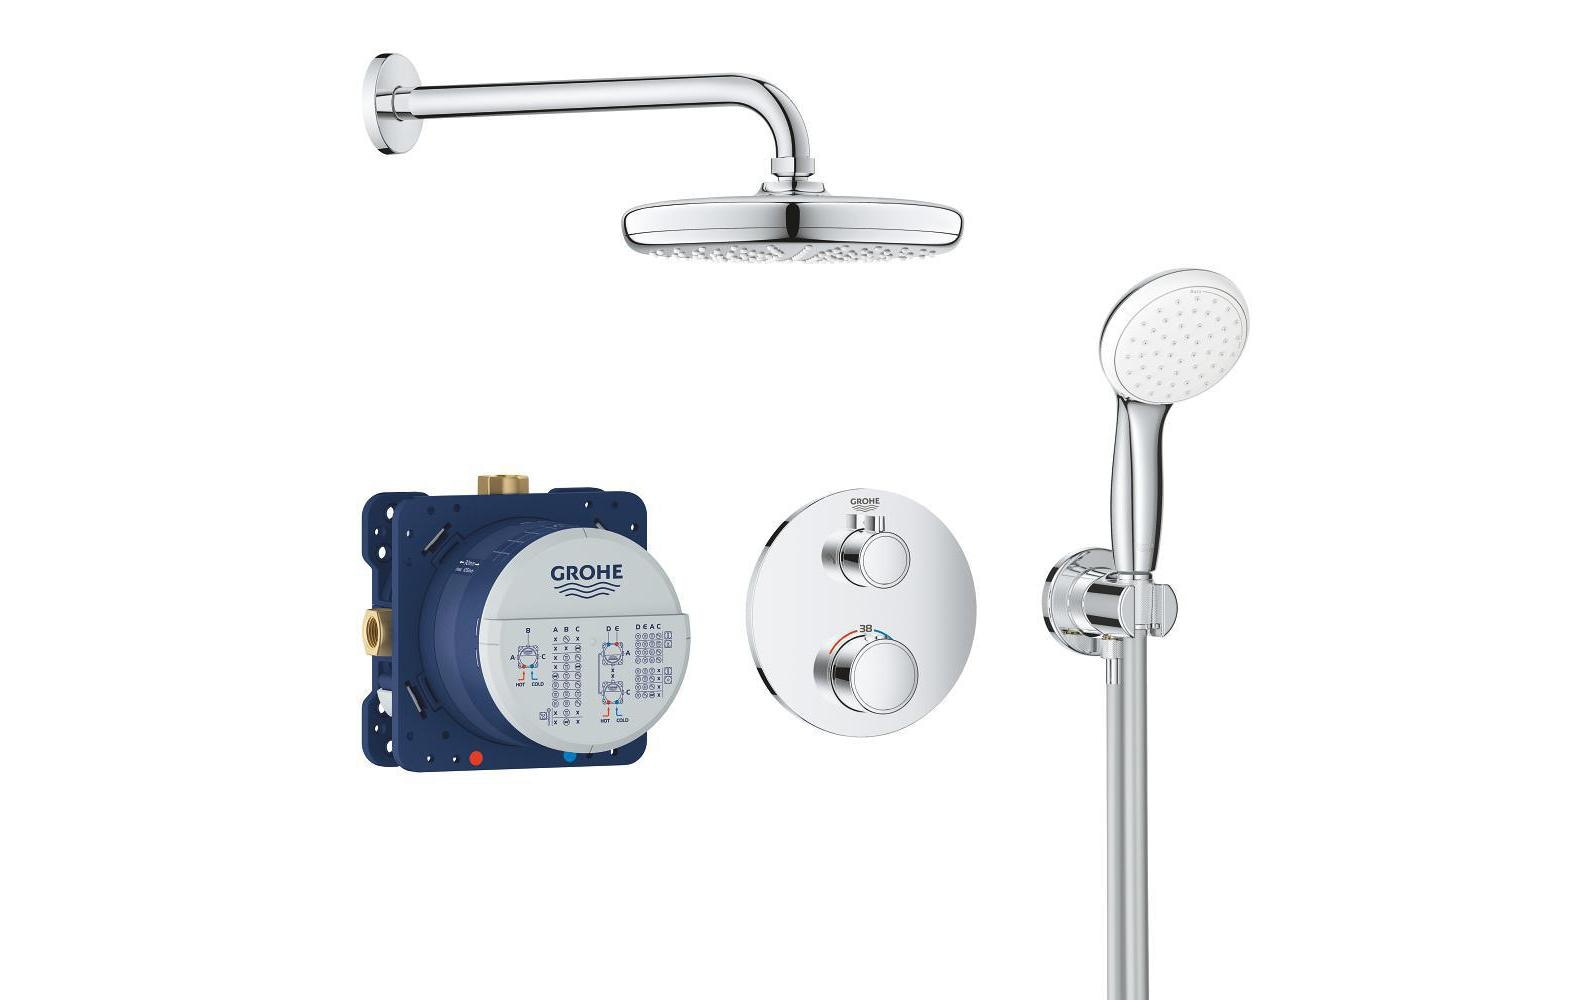 GROHE Duschsystem Grohtherm, Tempesta 210